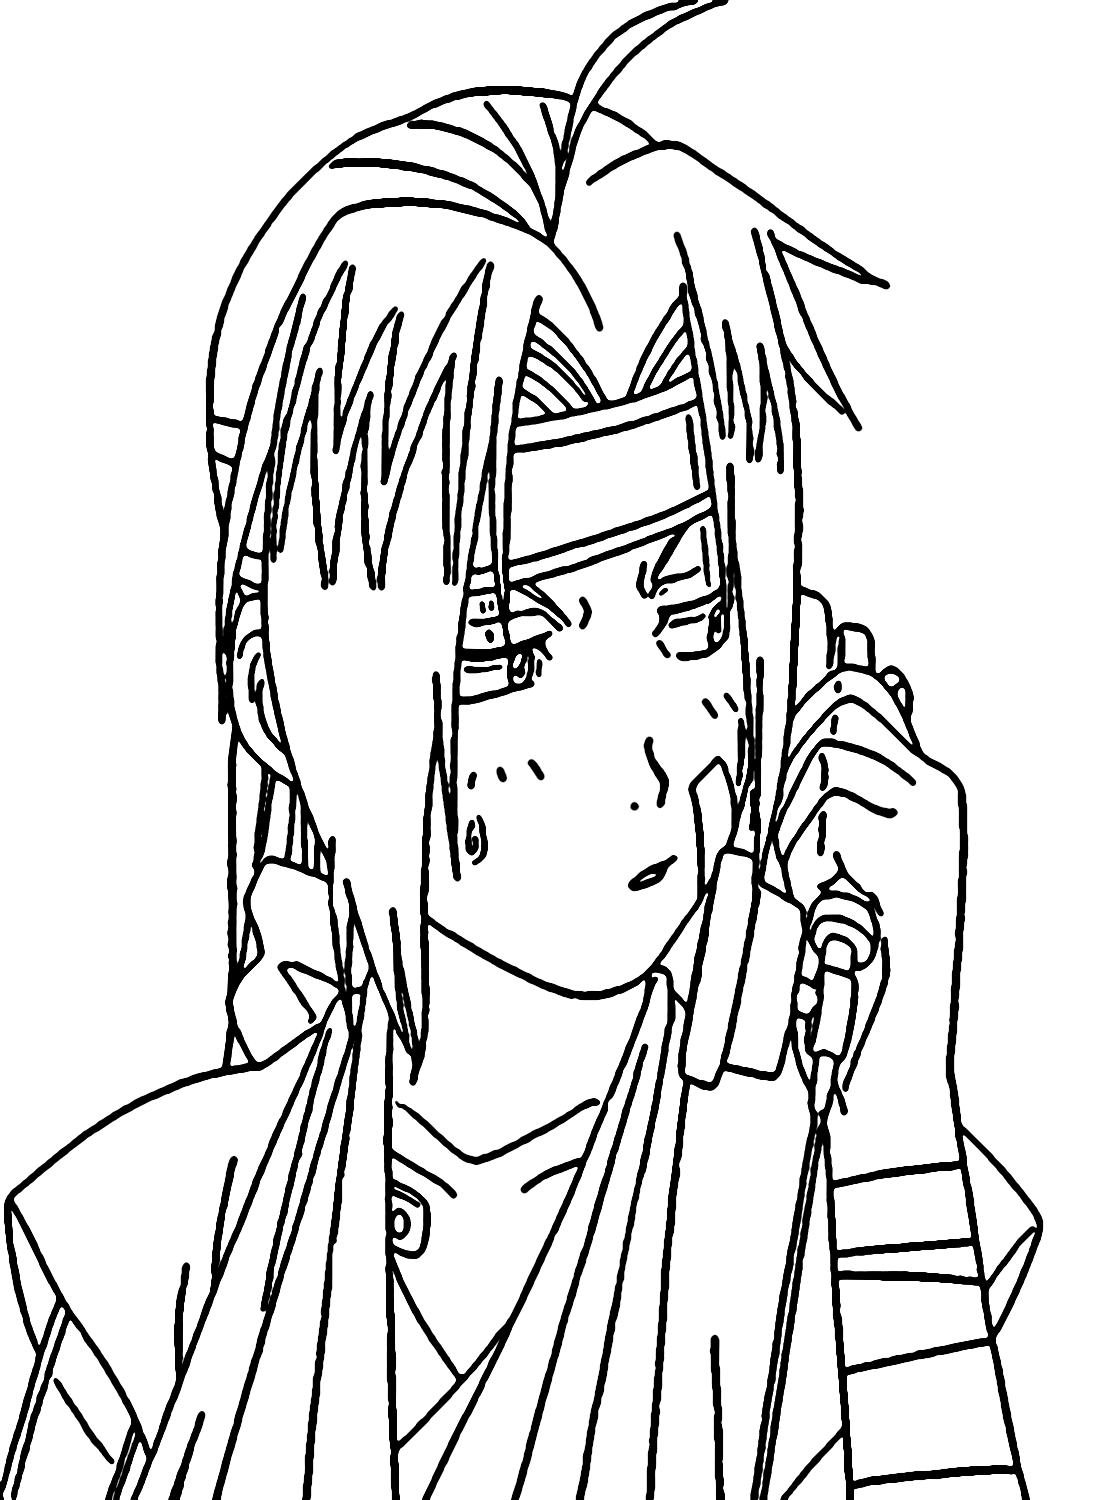 Edward Elric Answering the Phone Coloring Pages